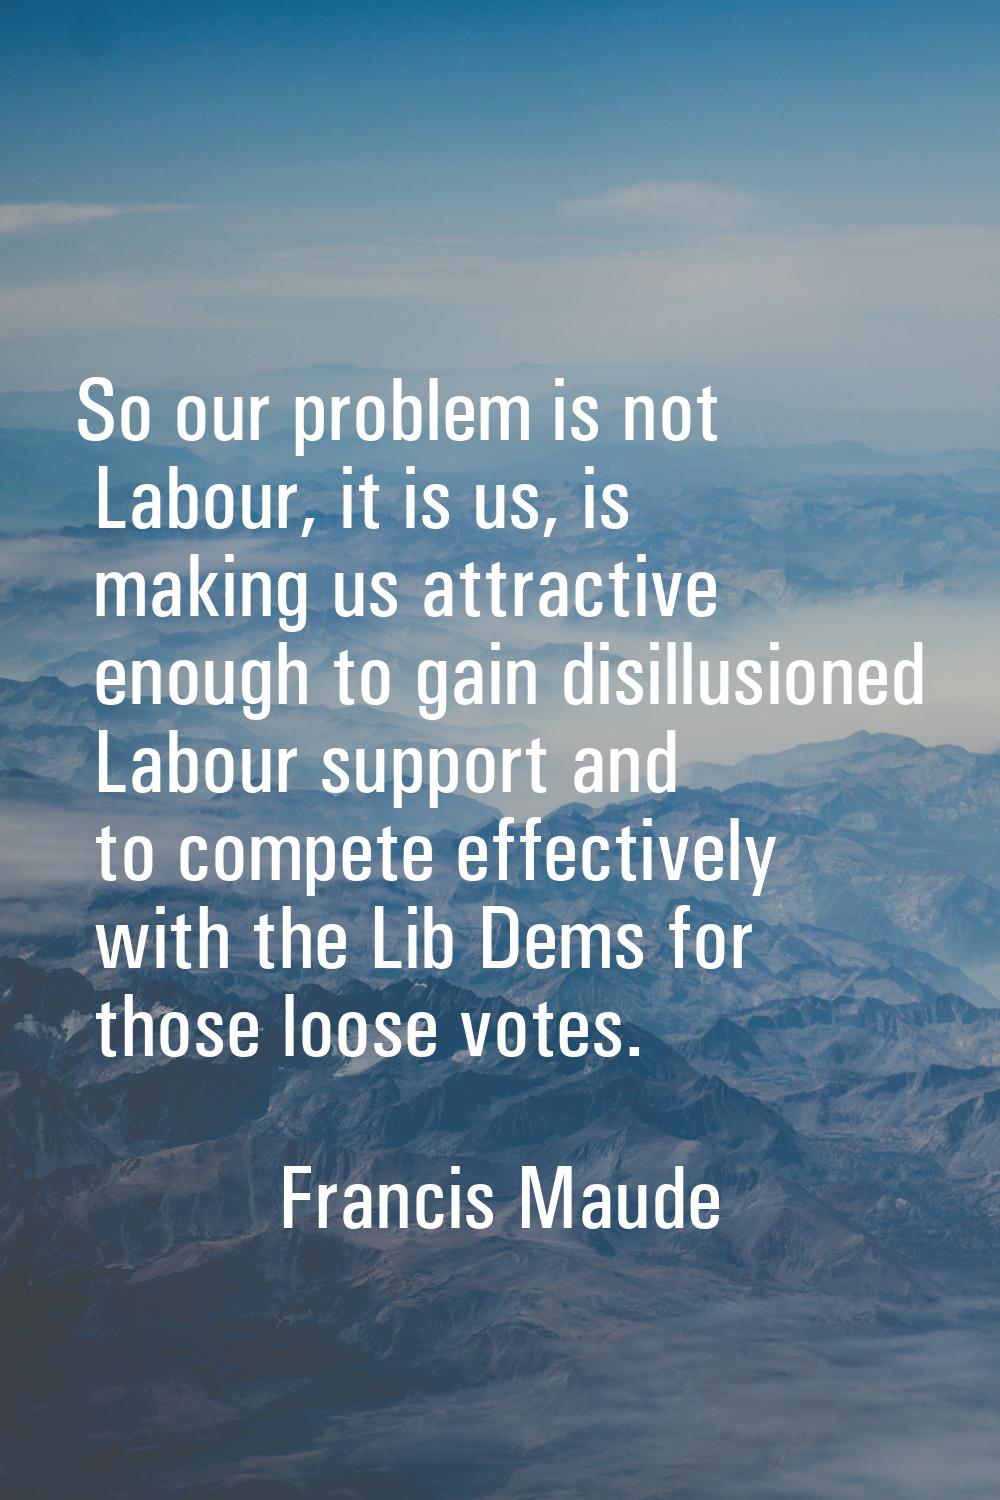 So our problem is not Labour, it is us, is making us attractive enough to gain disillusioned Labour